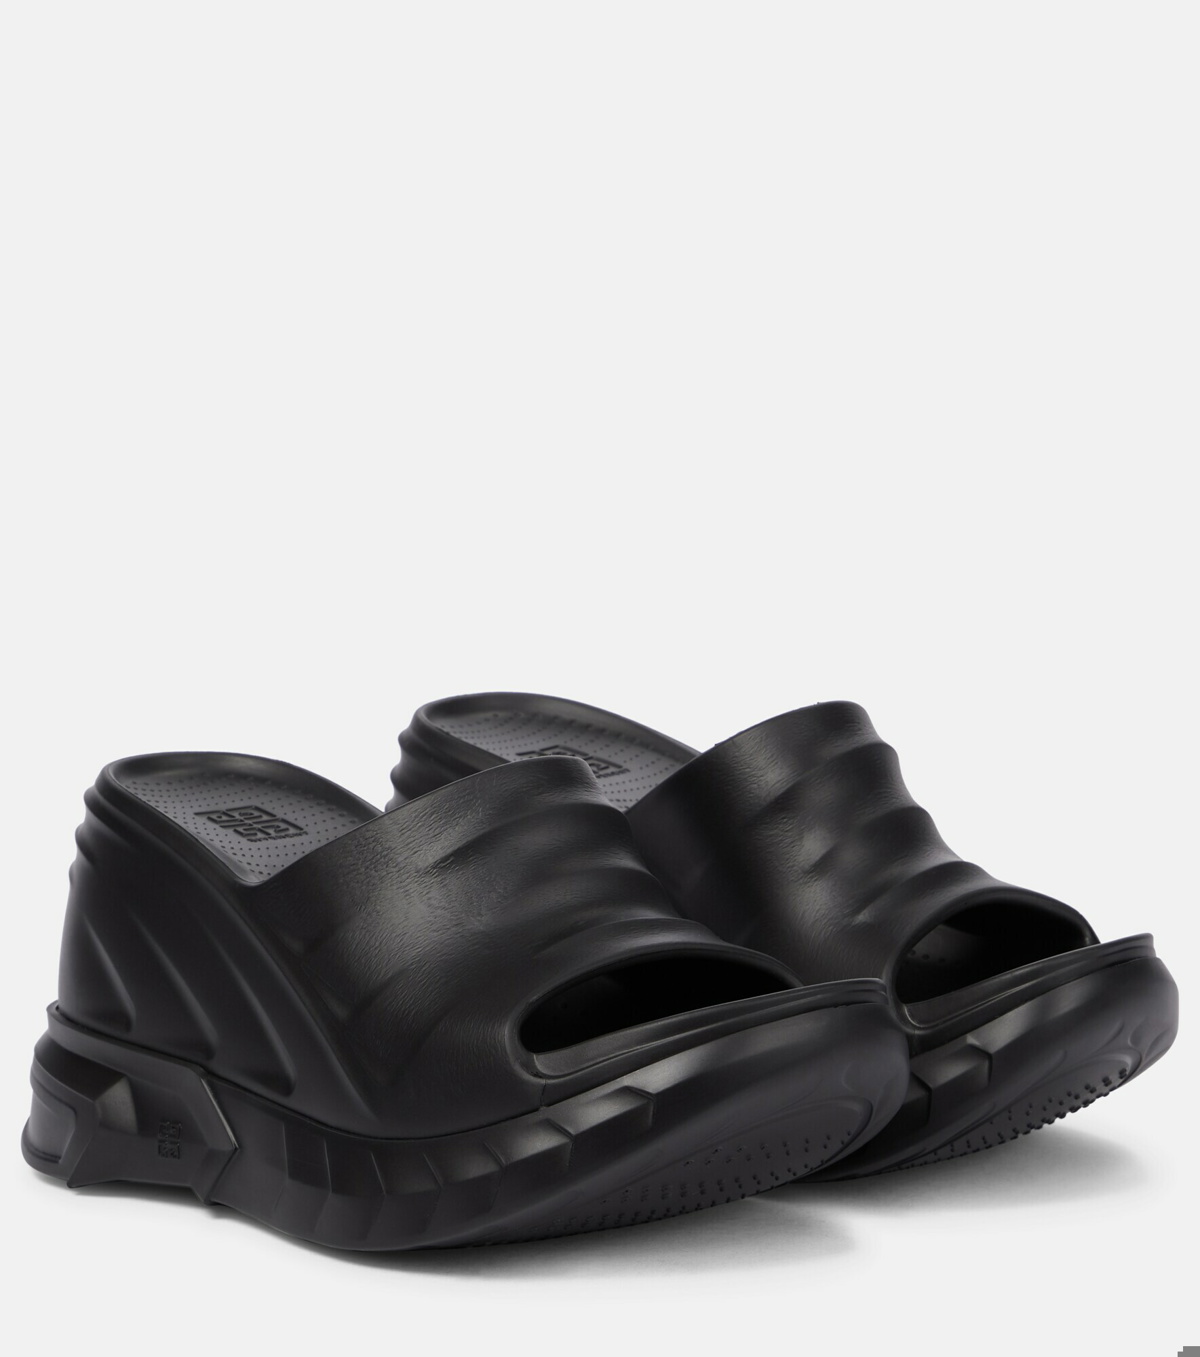 Givenchy - Marshmallow wedge sandals Givenchy